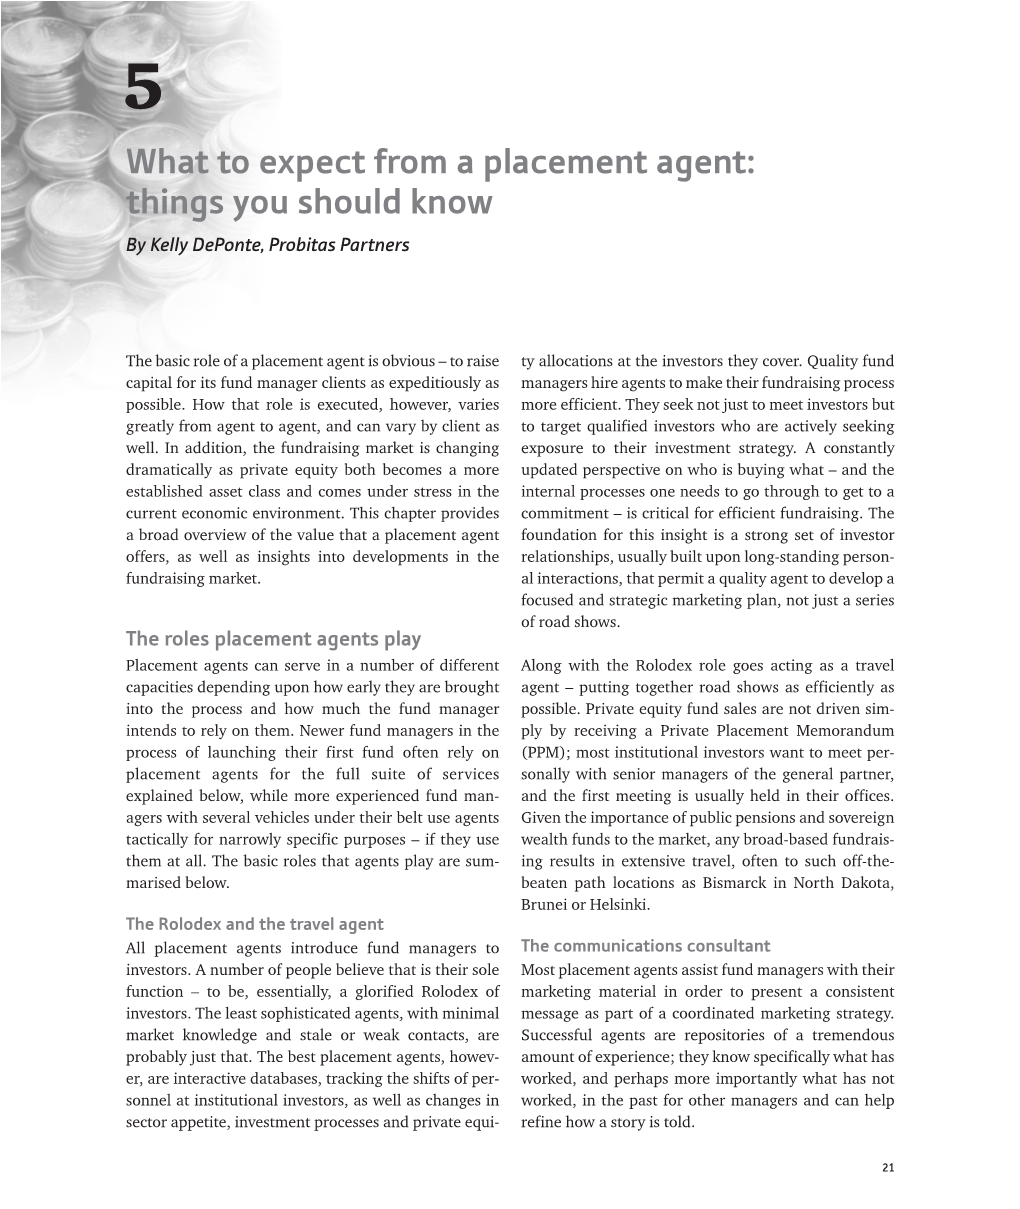 What to Expect from a Placement Agent: Things You Should Know by Kelly Deponte, Probitas Partners